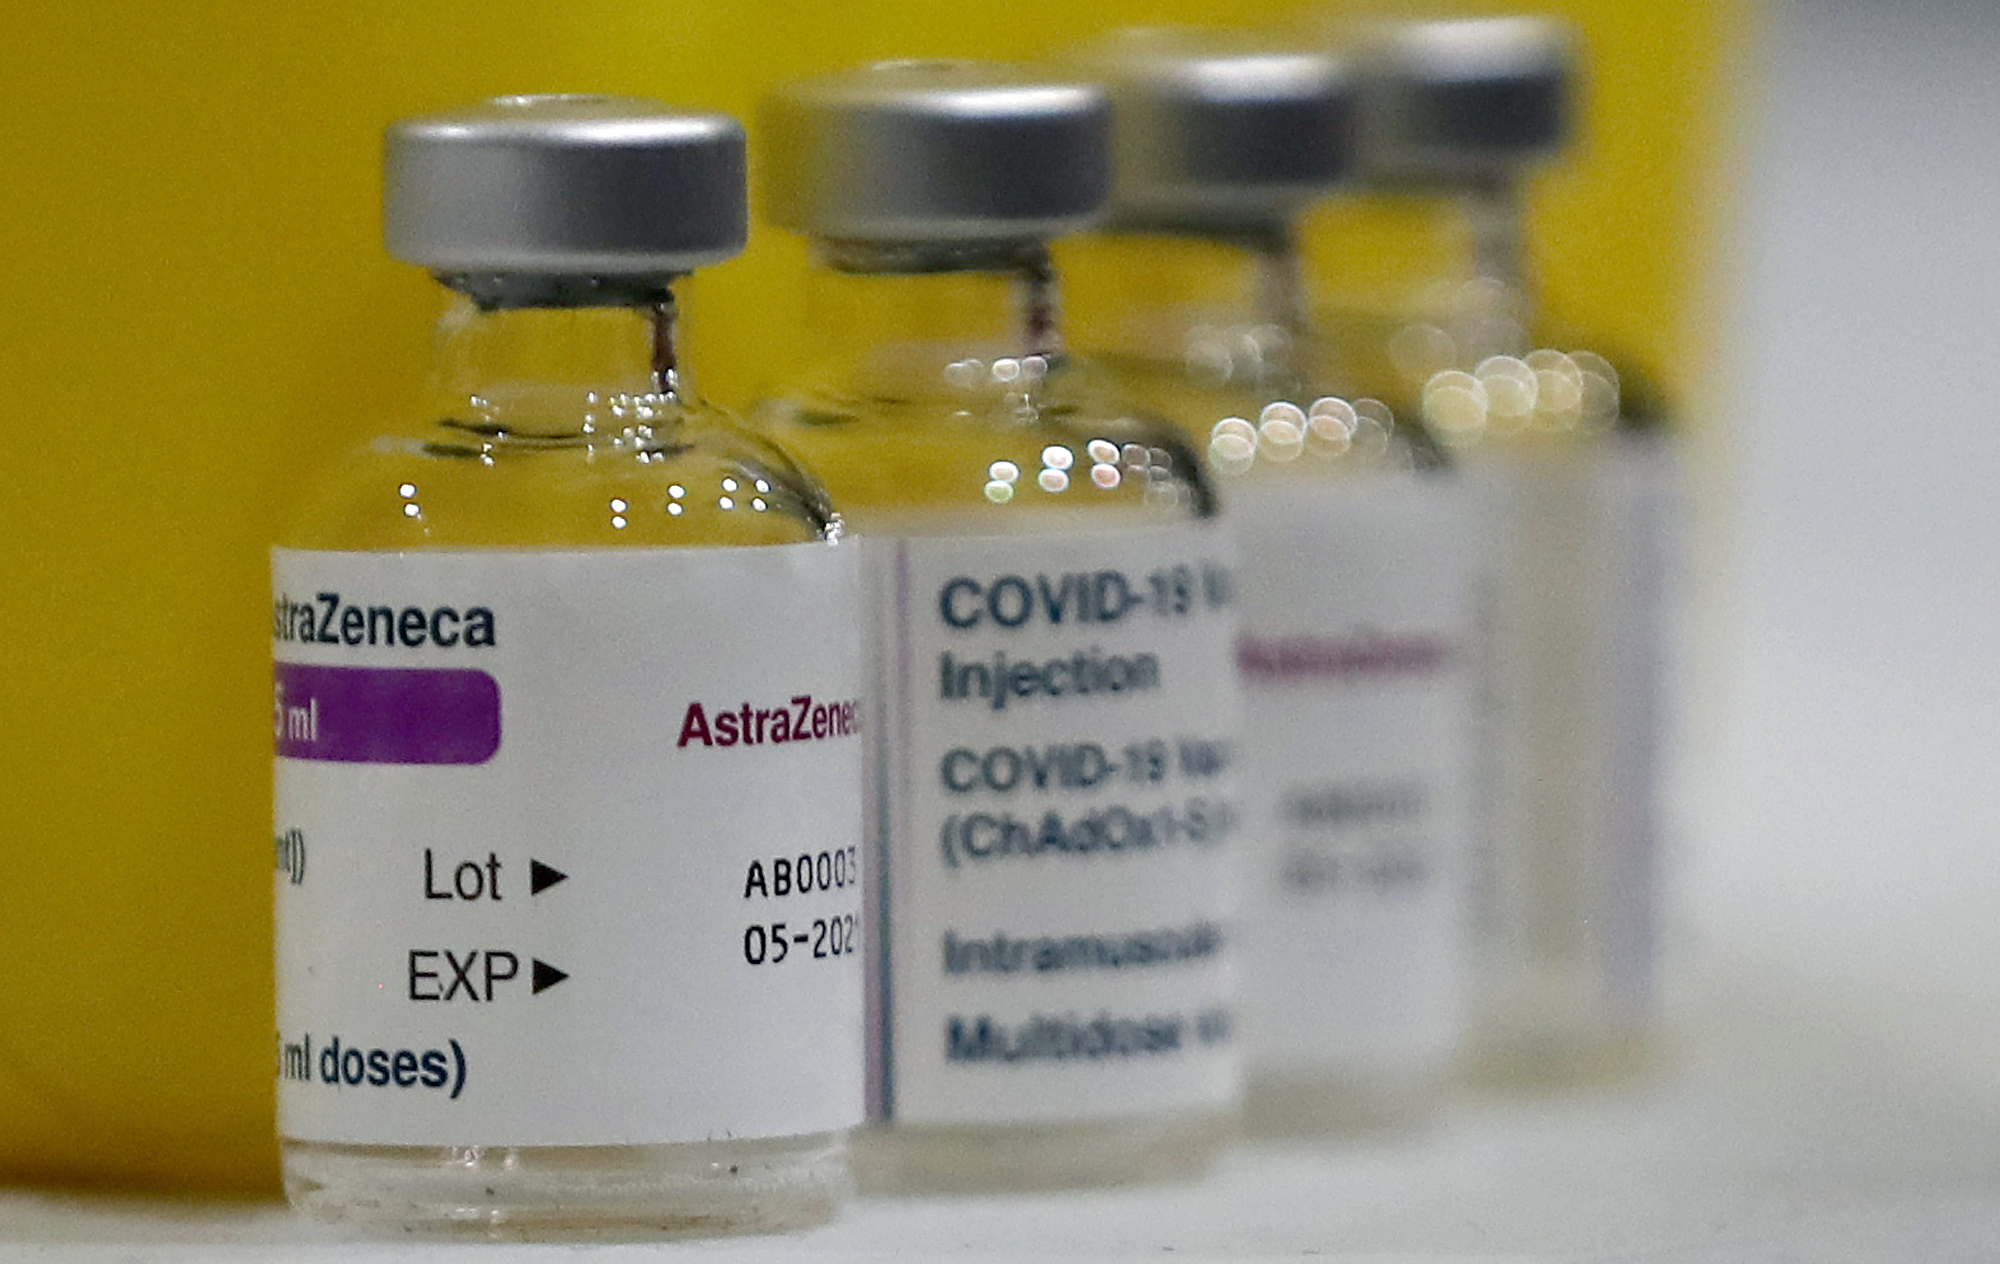 PHOTO: The AstraZeneca COVID-19 vaccine is ready to be used at a homeless shelter in Romford, east London, Feb. 3, 2021. In a study by Oxford University, the AstraZeneca vaccine has been shown to reduce transmission of the virus. 